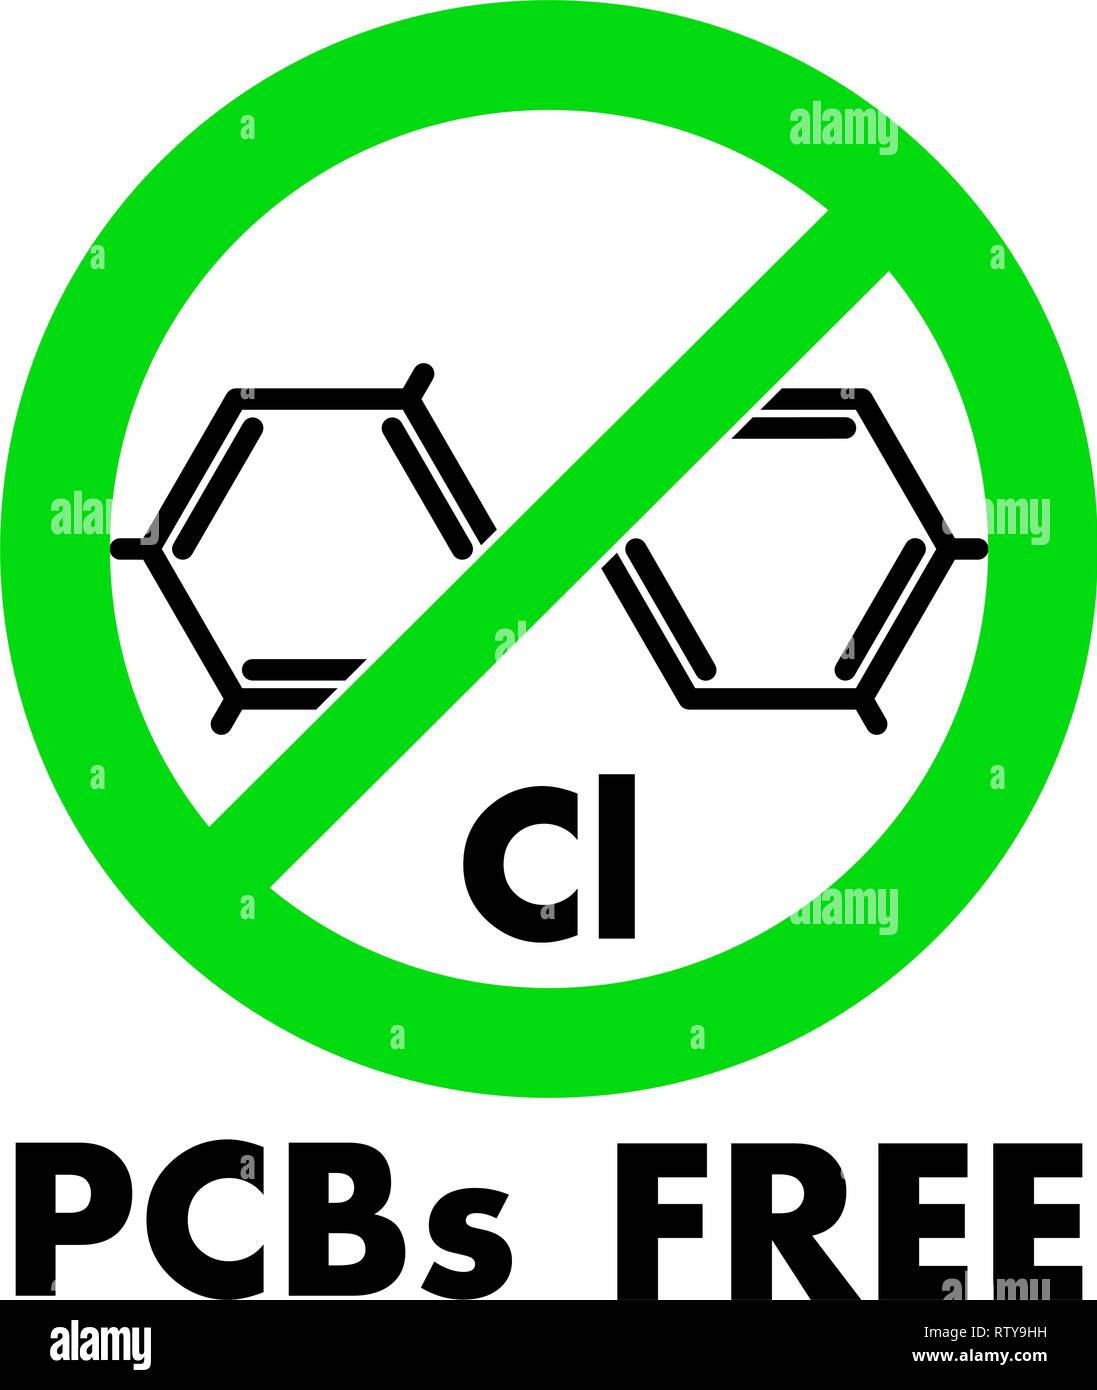 PCBs free icon. Polychlorinated biphenyls chemical molecule and letters Cl (chemical symbol for Chlorine) in green crossed circle, with text under. Stock Vector